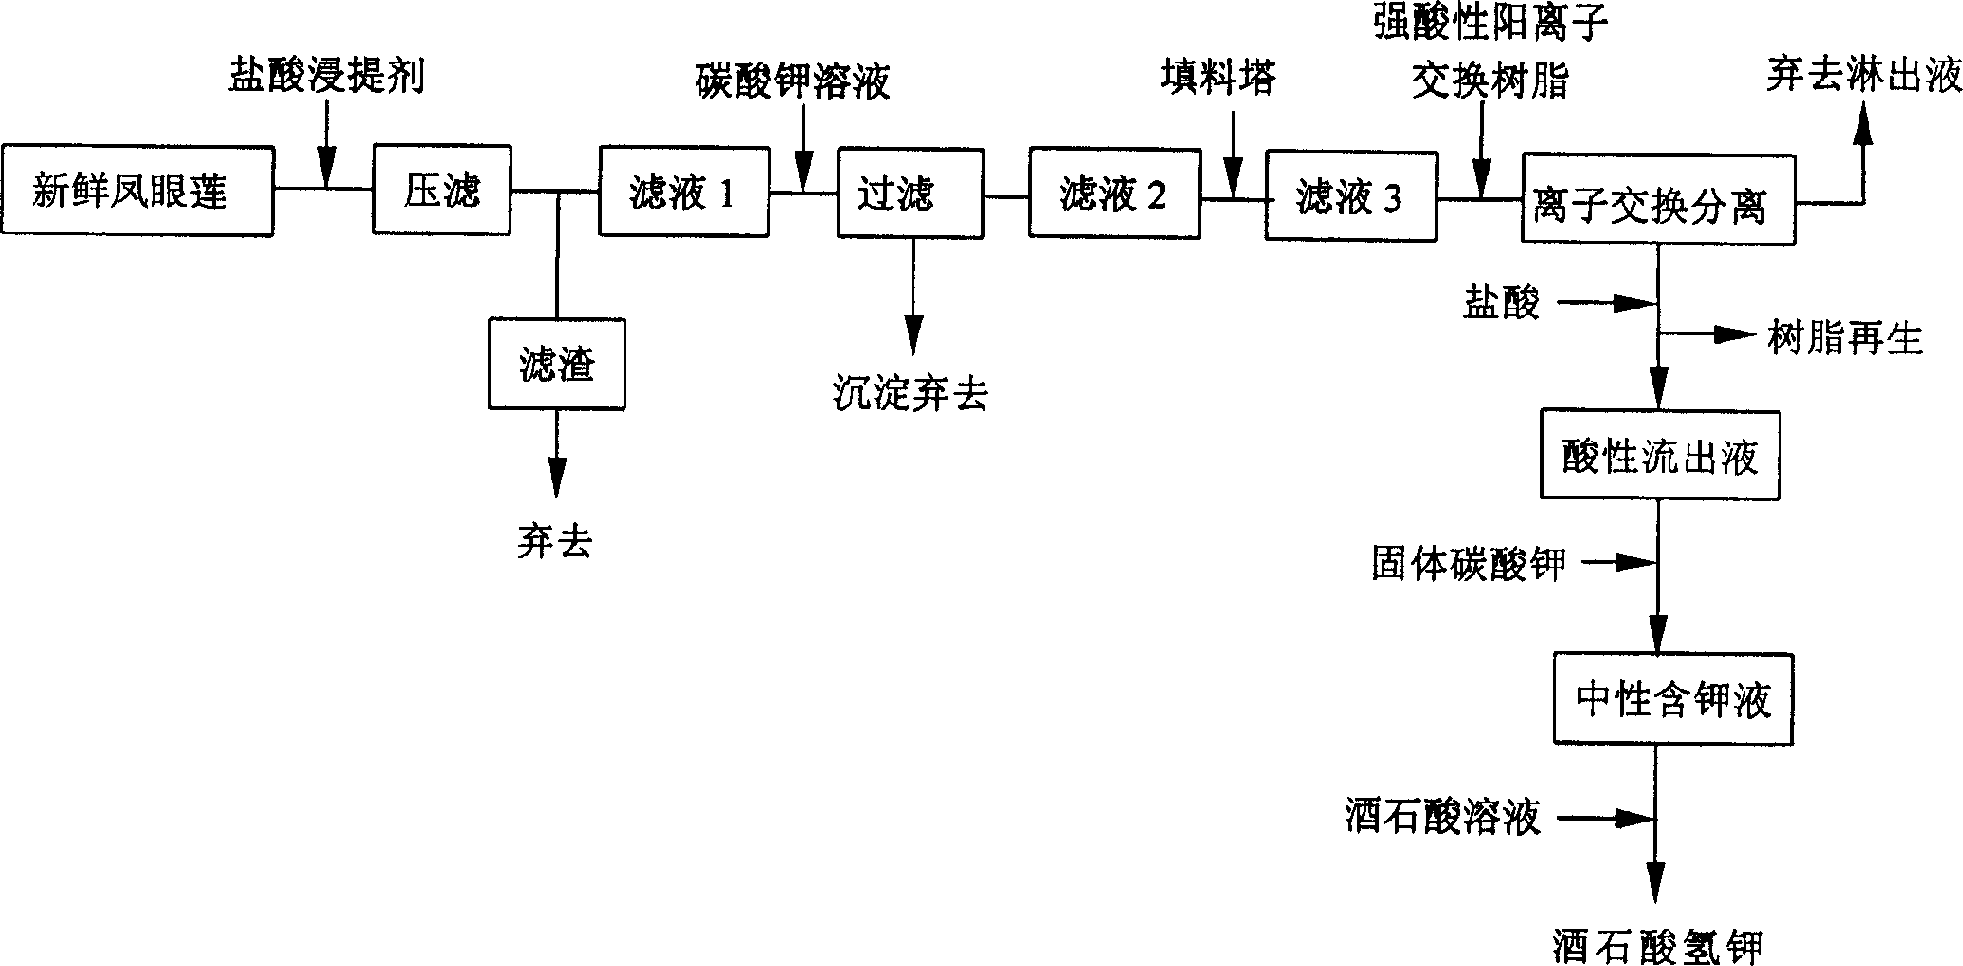 Process for separating and recovering potash element form Eichhornic crassipes plant